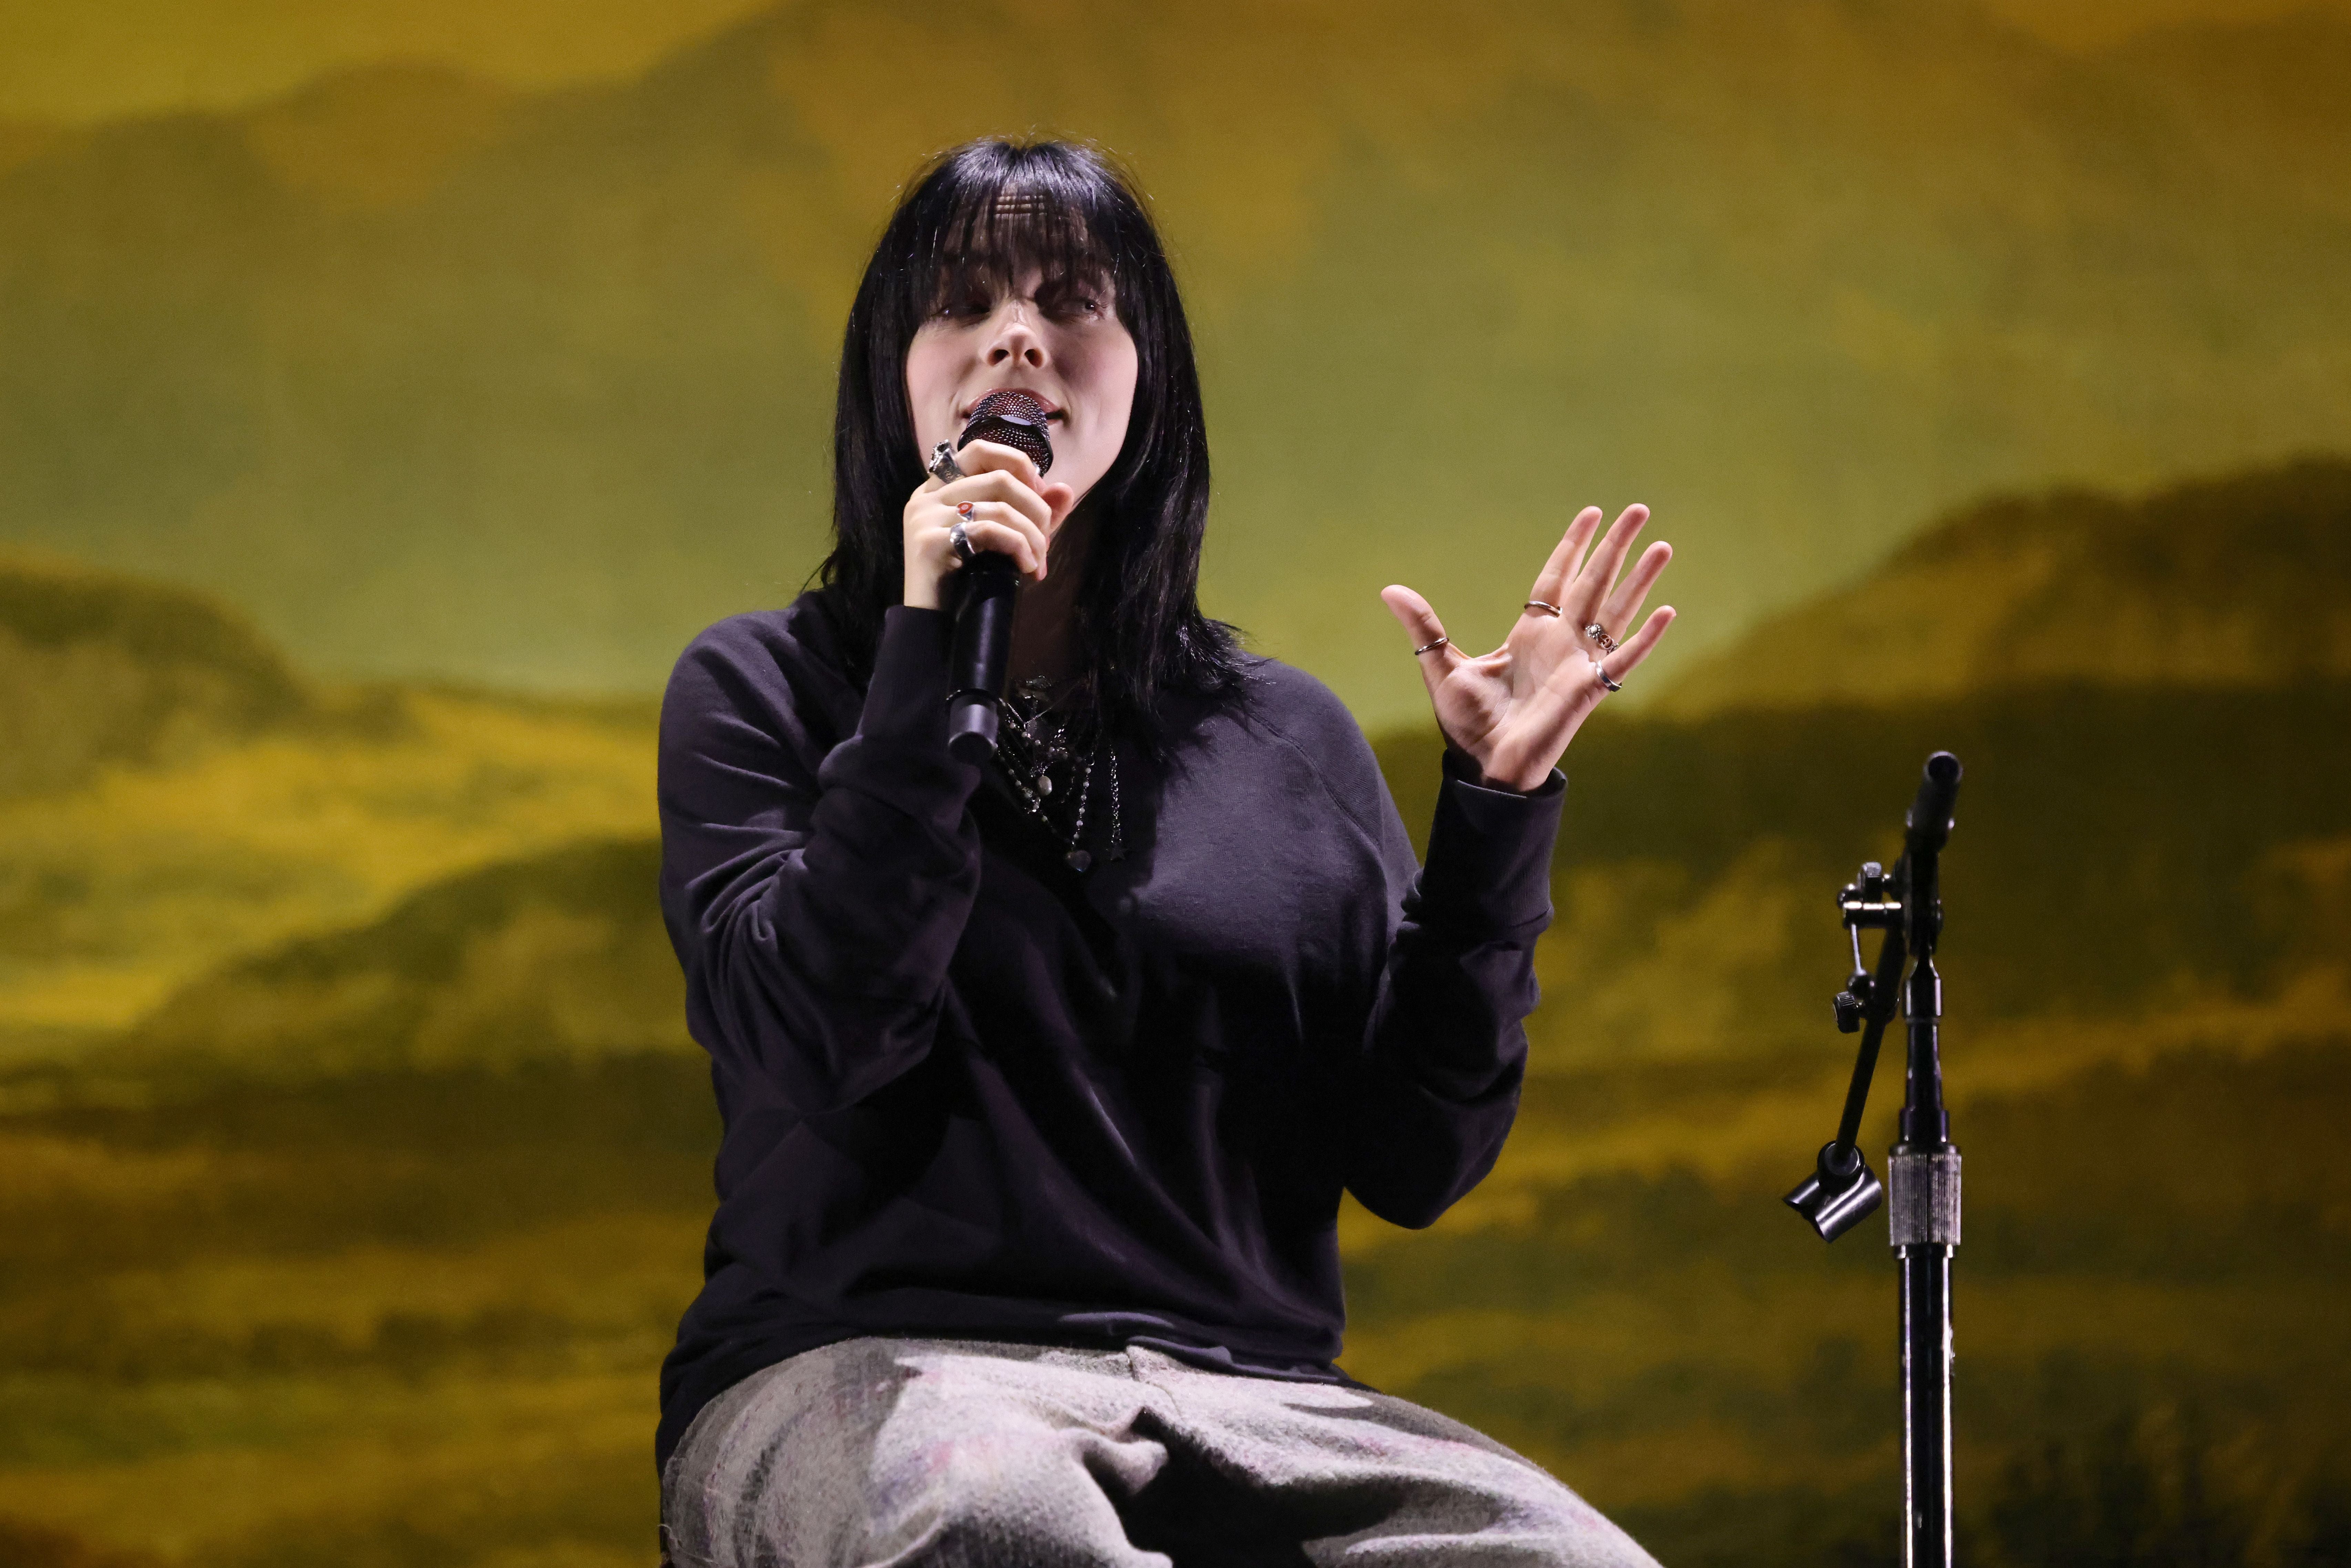 Are you sitting comofortably? Billie Eilish commands the stage with just a stool